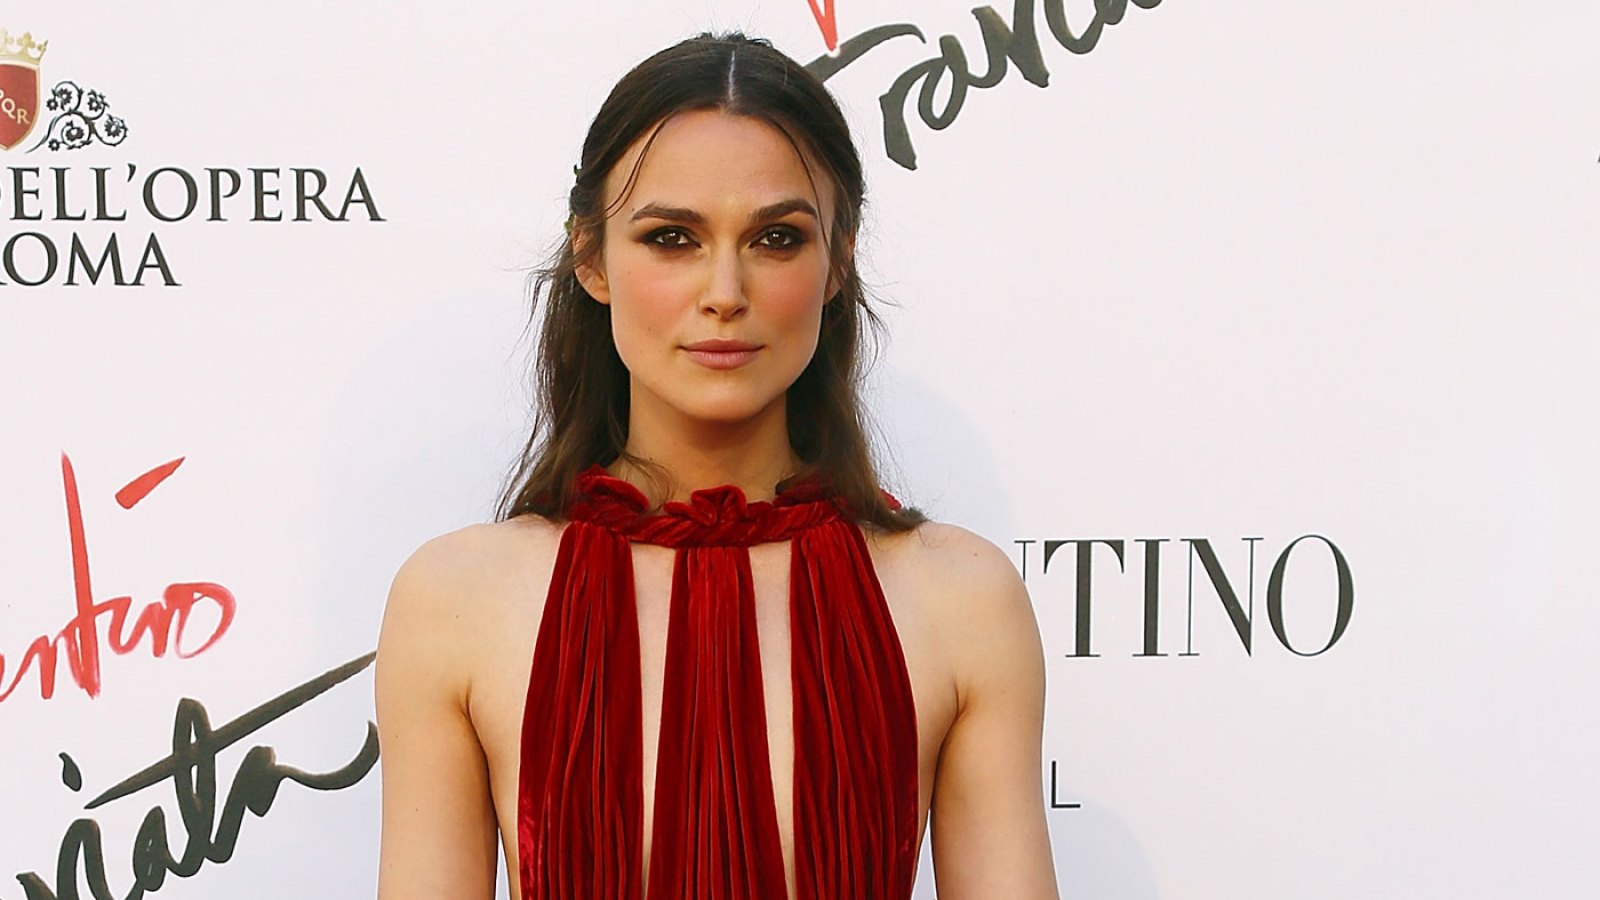 Keira Knightley has been criticized by a former director for having a crazy entourage